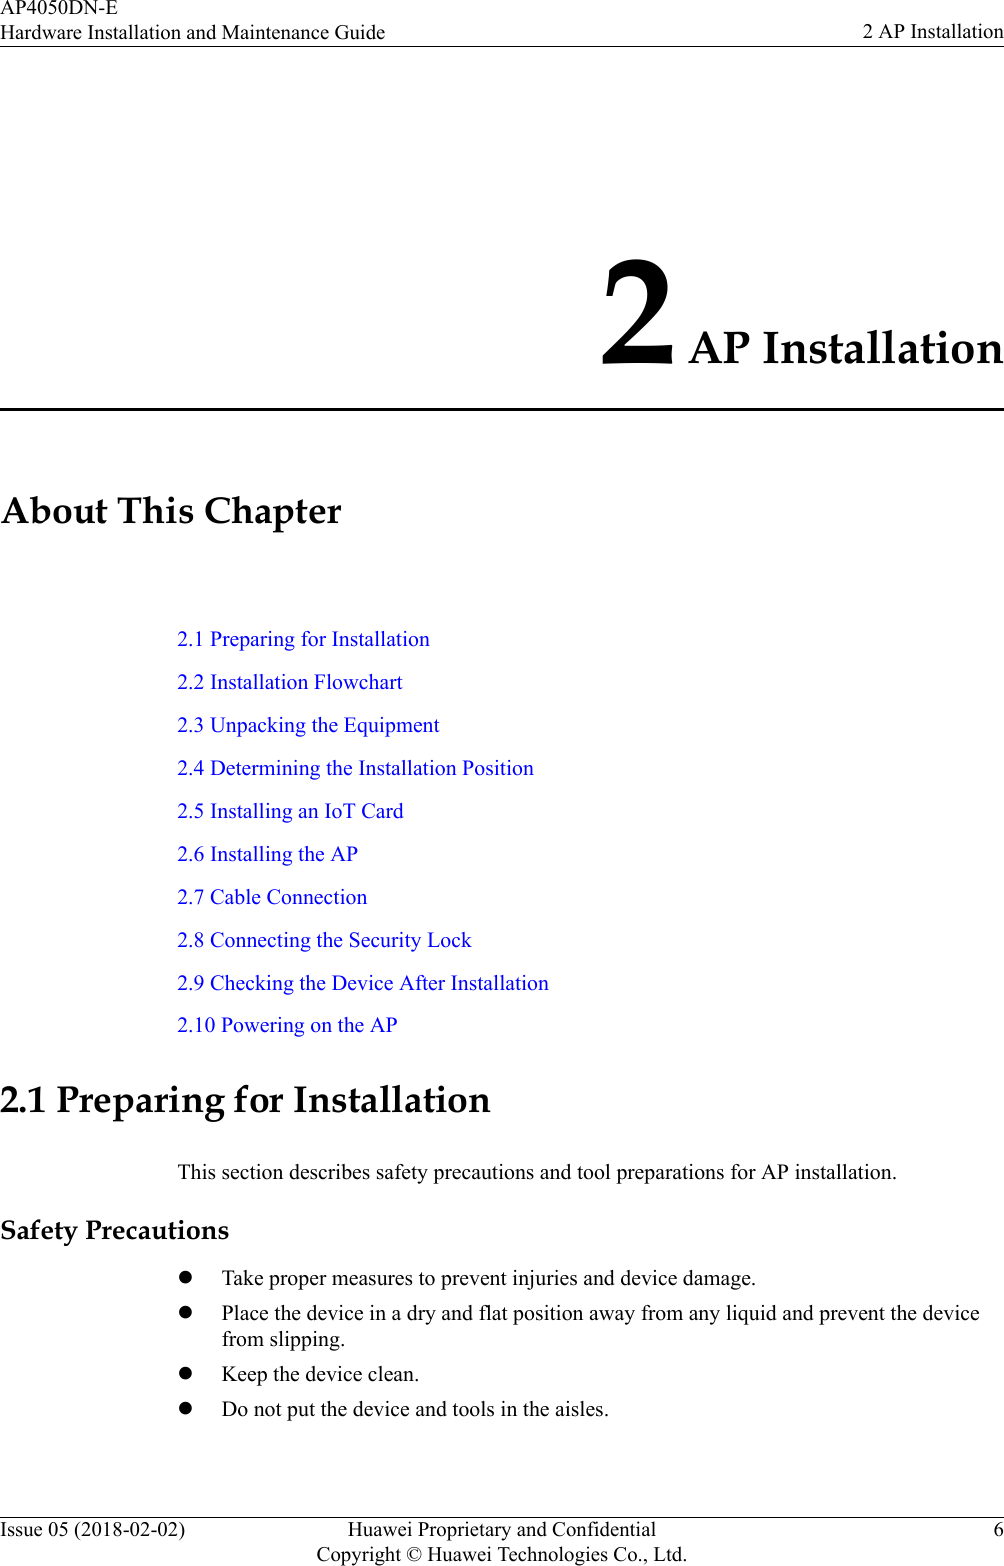 2 AP InstallationAbout This Chapter2.1 Preparing for Installation2.2 Installation Flowchart2.3 Unpacking the Equipment2.4 Determining the Installation Position2.5 Installing an IoT Card2.6 Installing the AP2.7 Cable Connection2.8 Connecting the Security Lock2.9 Checking the Device After Installation2.10 Powering on the AP2.1 Preparing for InstallationThis section describes safety precautions and tool preparations for AP installation.Safety PrecautionslTake proper measures to prevent injuries and device damage.lPlace the device in a dry and flat position away from any liquid and prevent the devicefrom slipping.lKeep the device clean.lDo not put the device and tools in the aisles.AP4050DN-EHardware Installation and Maintenance Guide 2 AP InstallationIssue 05 (2018-02-02) Huawei Proprietary and ConfidentialCopyright © Huawei Technologies Co., Ltd.6